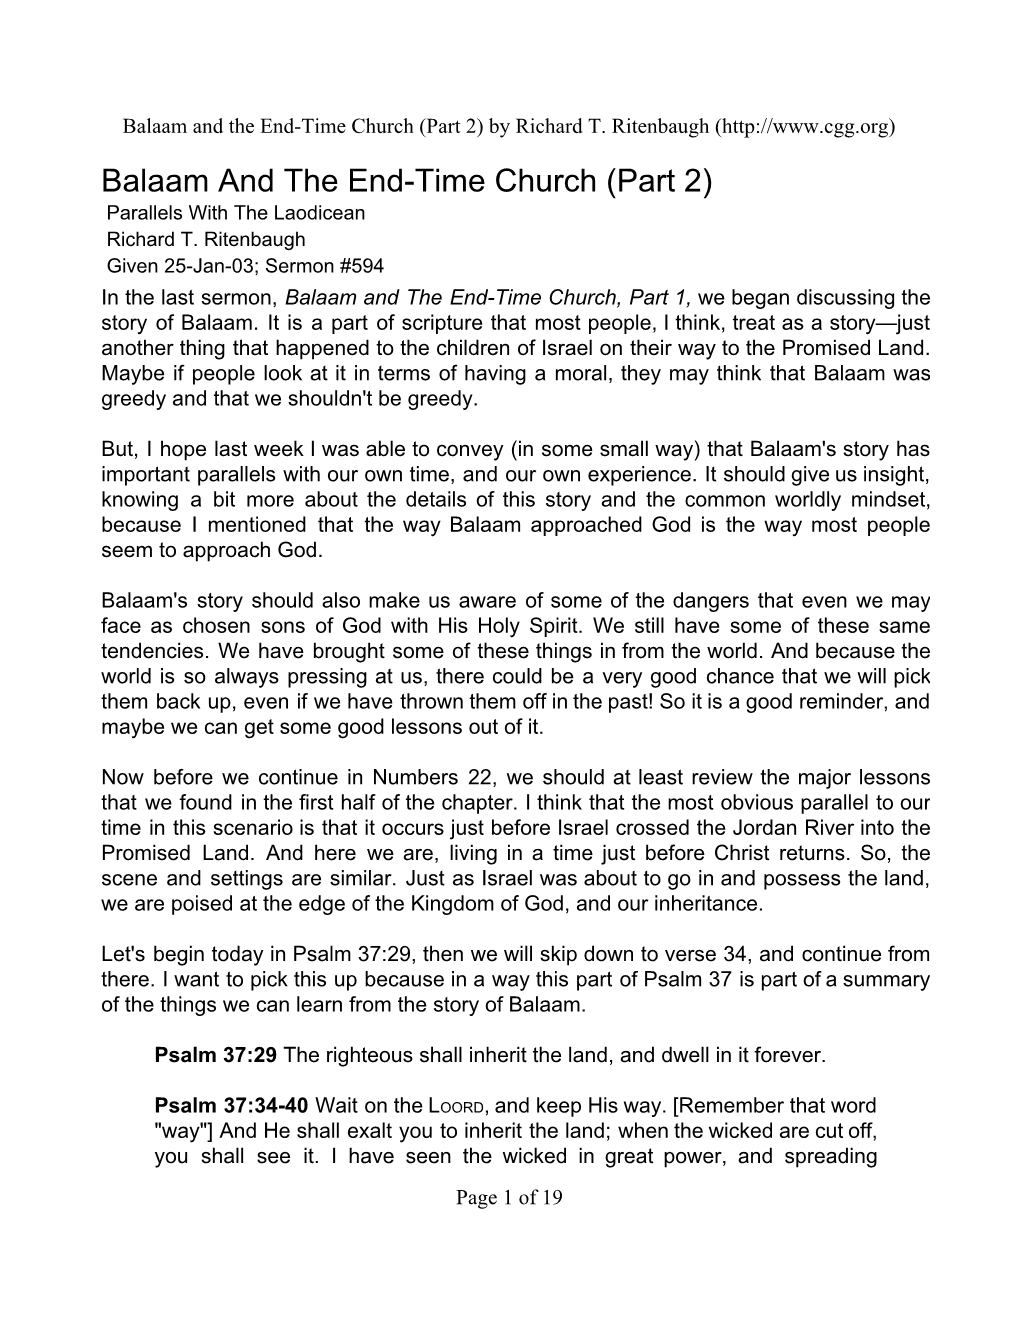 Balaam and the End-Time Church (Part 2) by Richard T